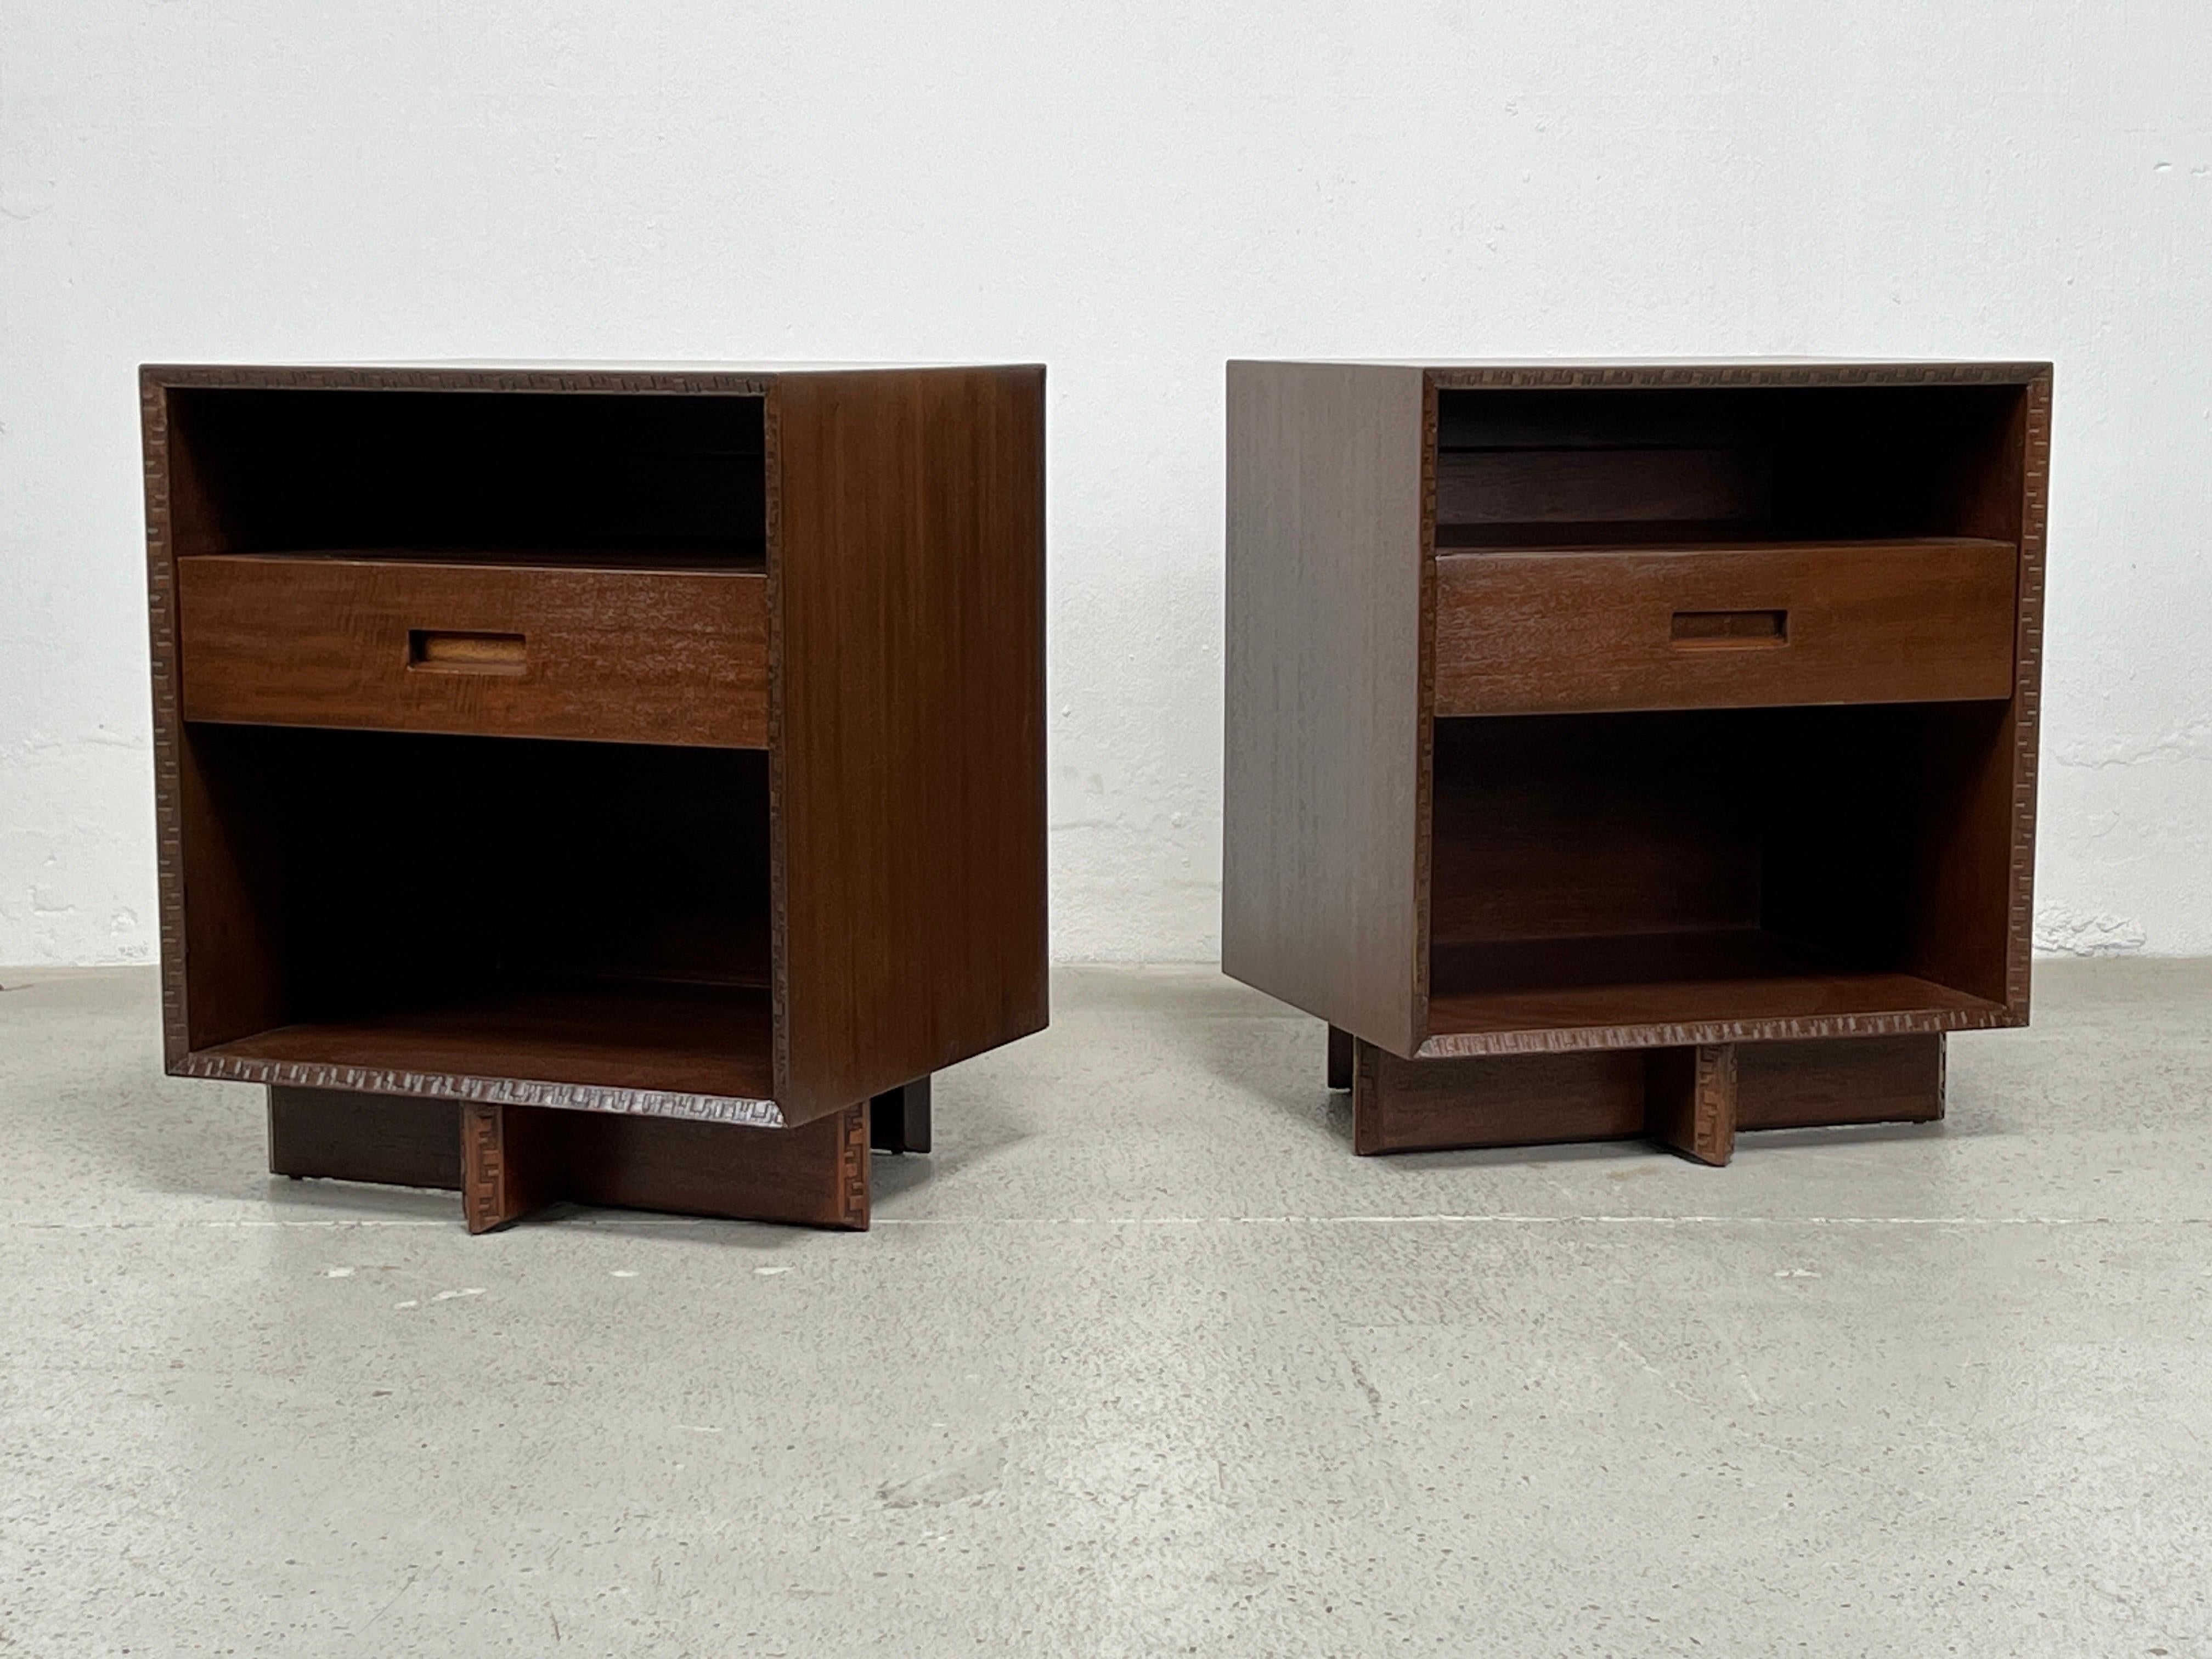 A pair of mahogany bedside tables designed by Frank Lloyd Wright for Henredon.